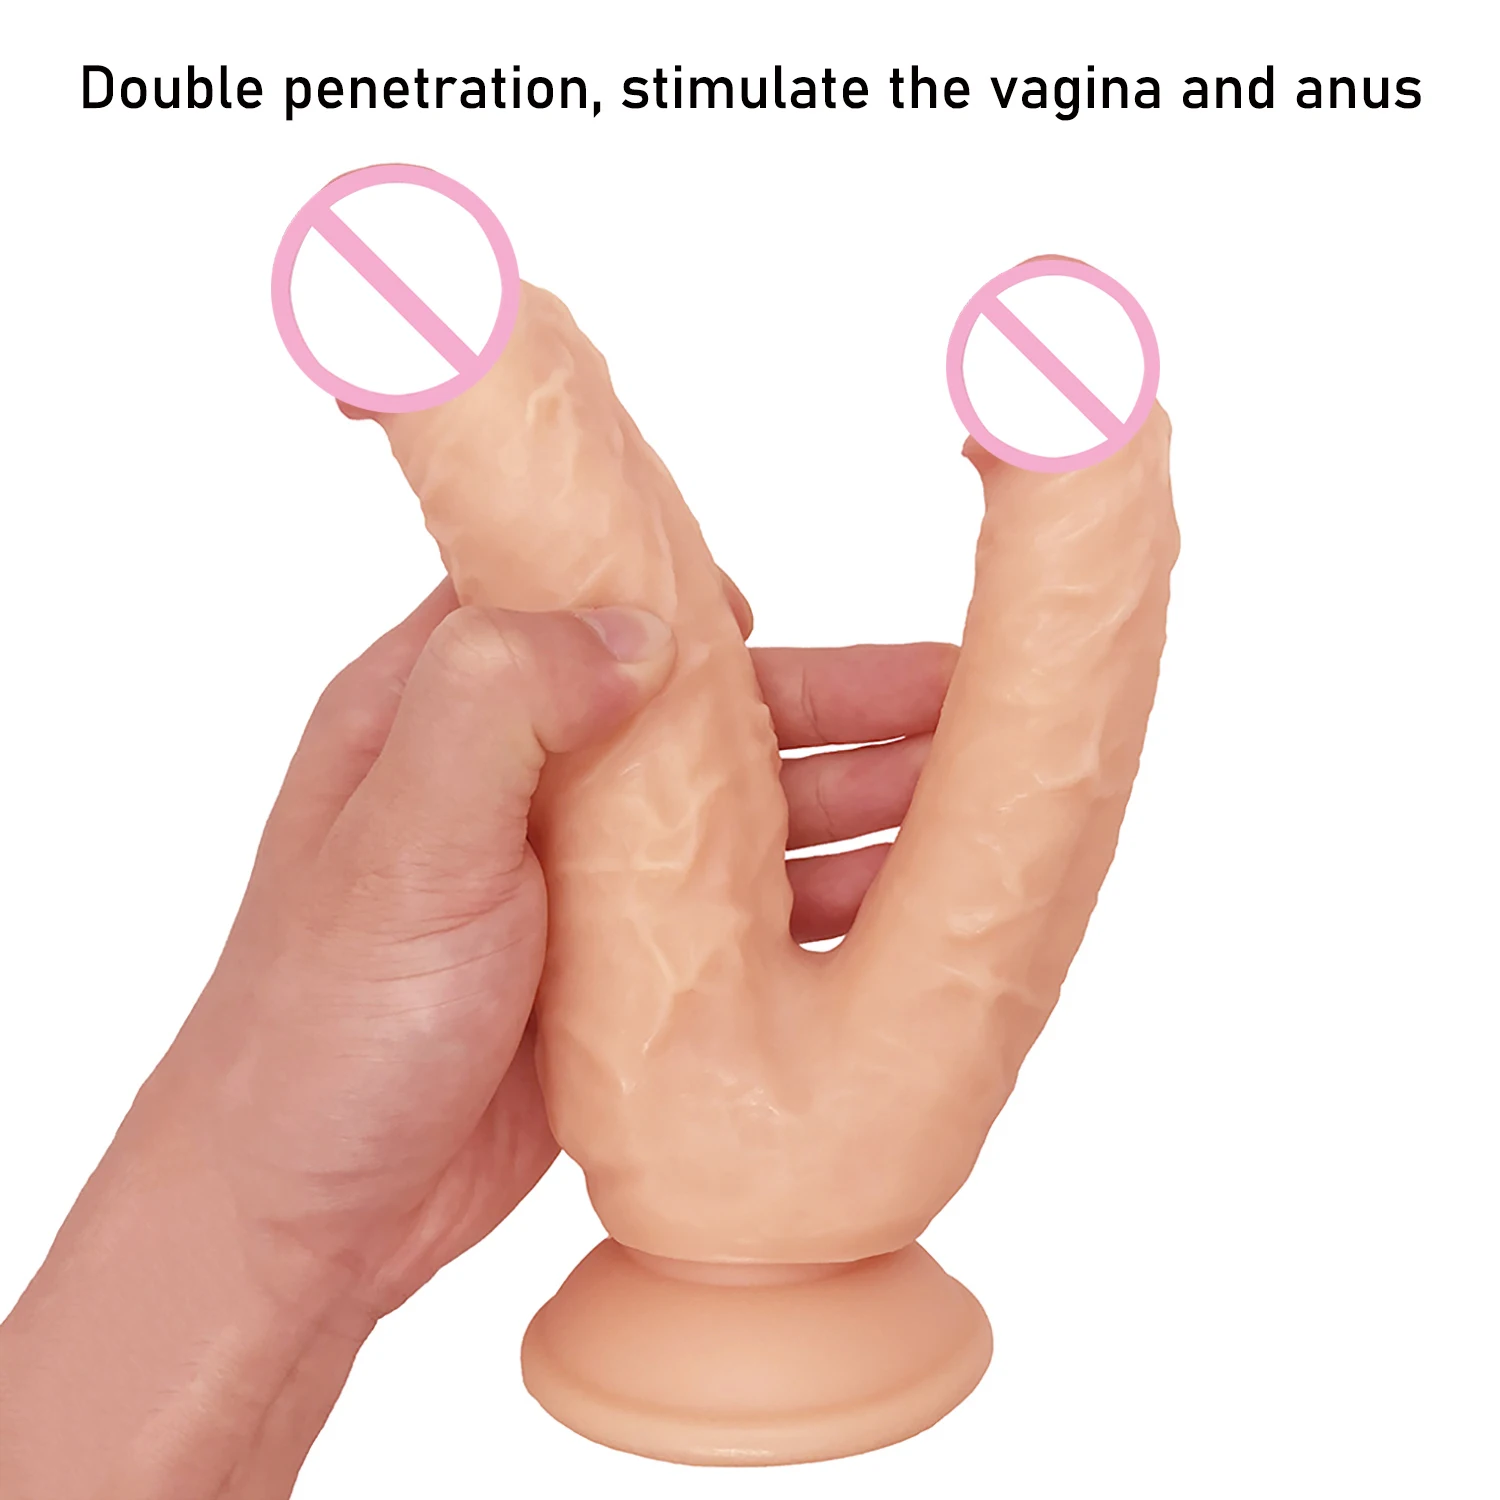 abraham jacobson recommends How Does Double Penetration Feel